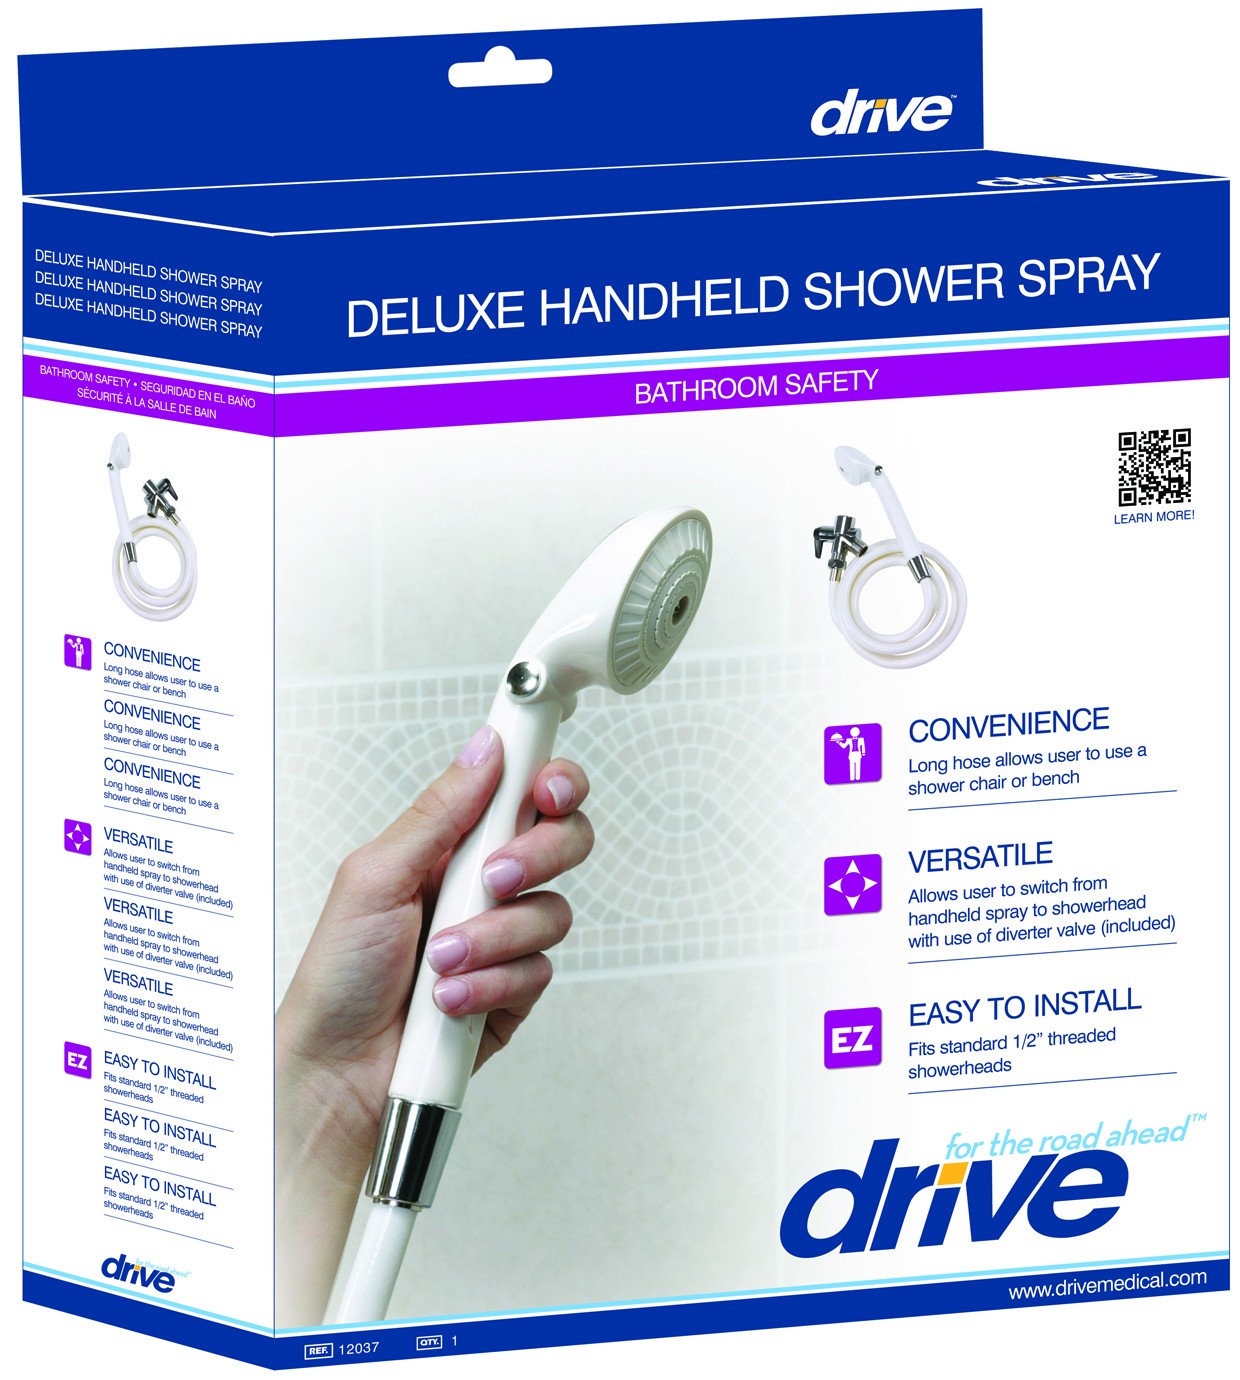 Drive Deluxe Handheld Shower Spray Drive Deluxe Handheld Shower Spray Shower Sprays Drive - Americare Medical Supply